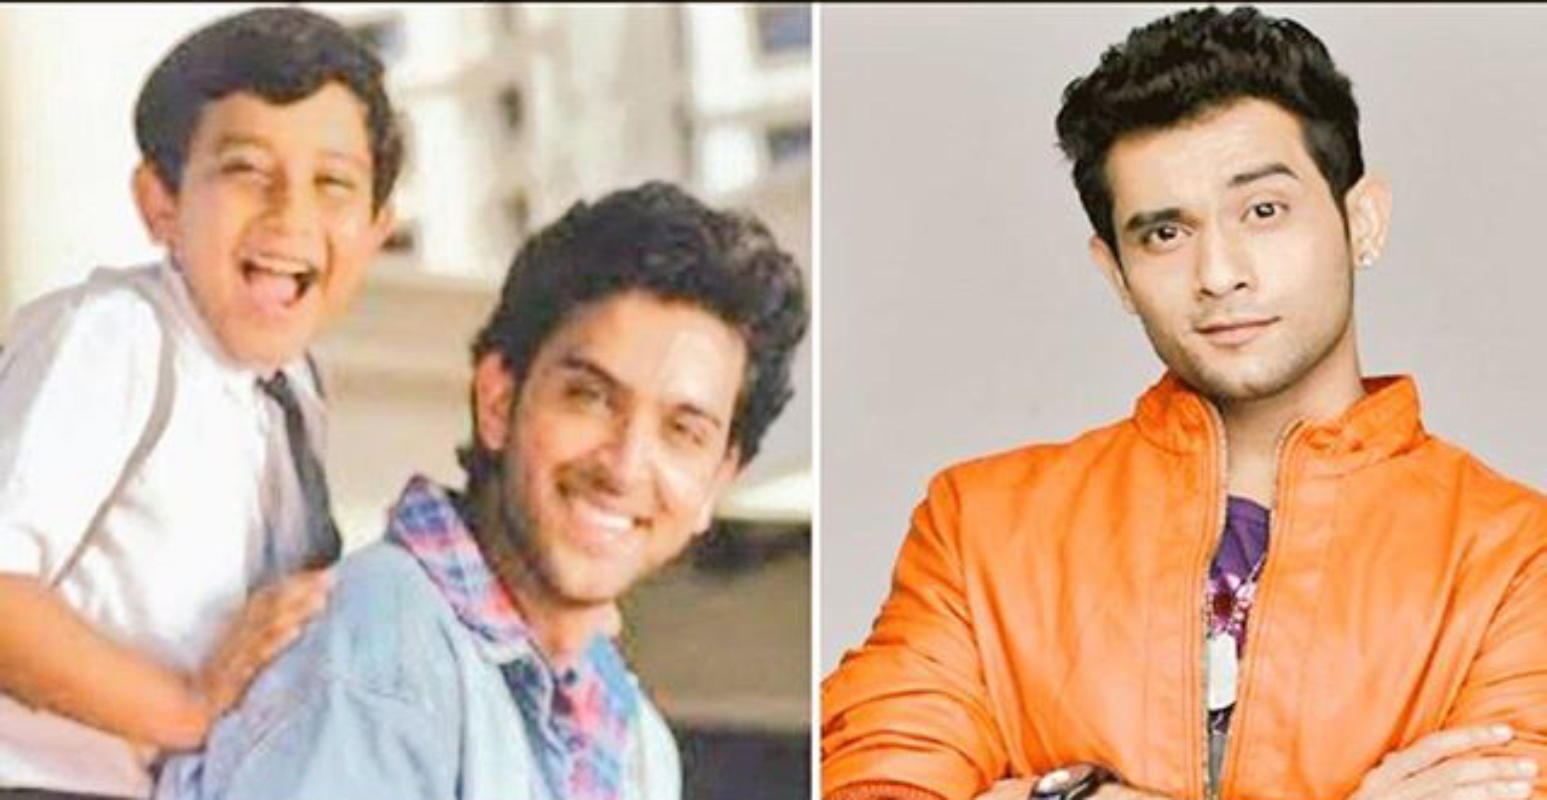 Remember Hrithik Roshan's brother from Kaho Naa... Pyaar Hai? Here's how he looks now...